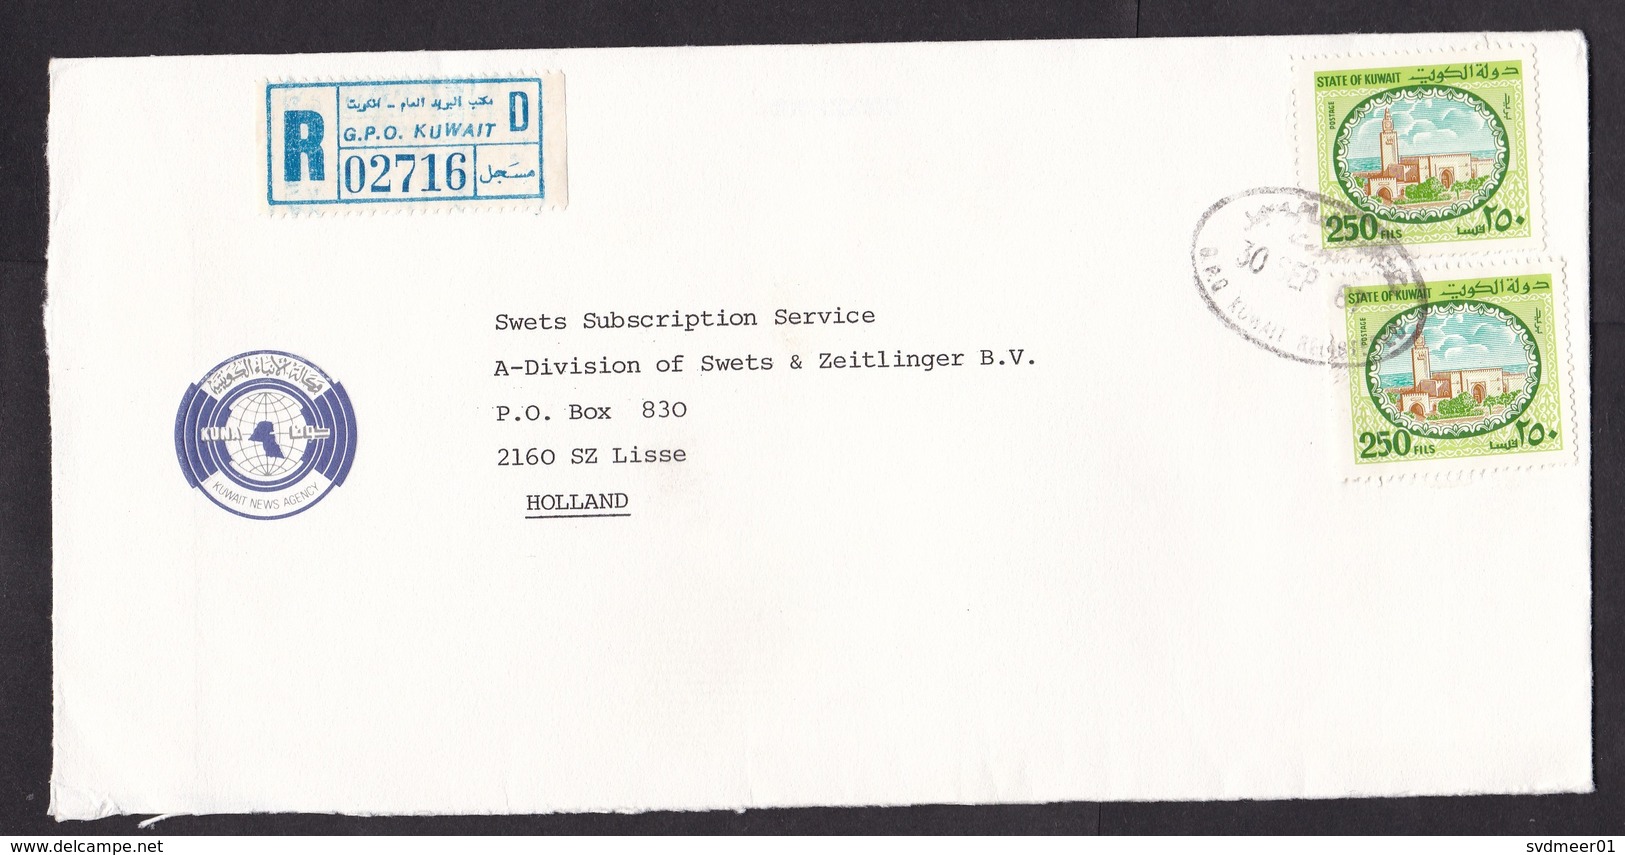 Kuwait: Registered Airmail Cover To Netherlands, 1987, 2 Stamps, Mosque, R-label GPO, From News Agency (traces Of Use) - Koeweit